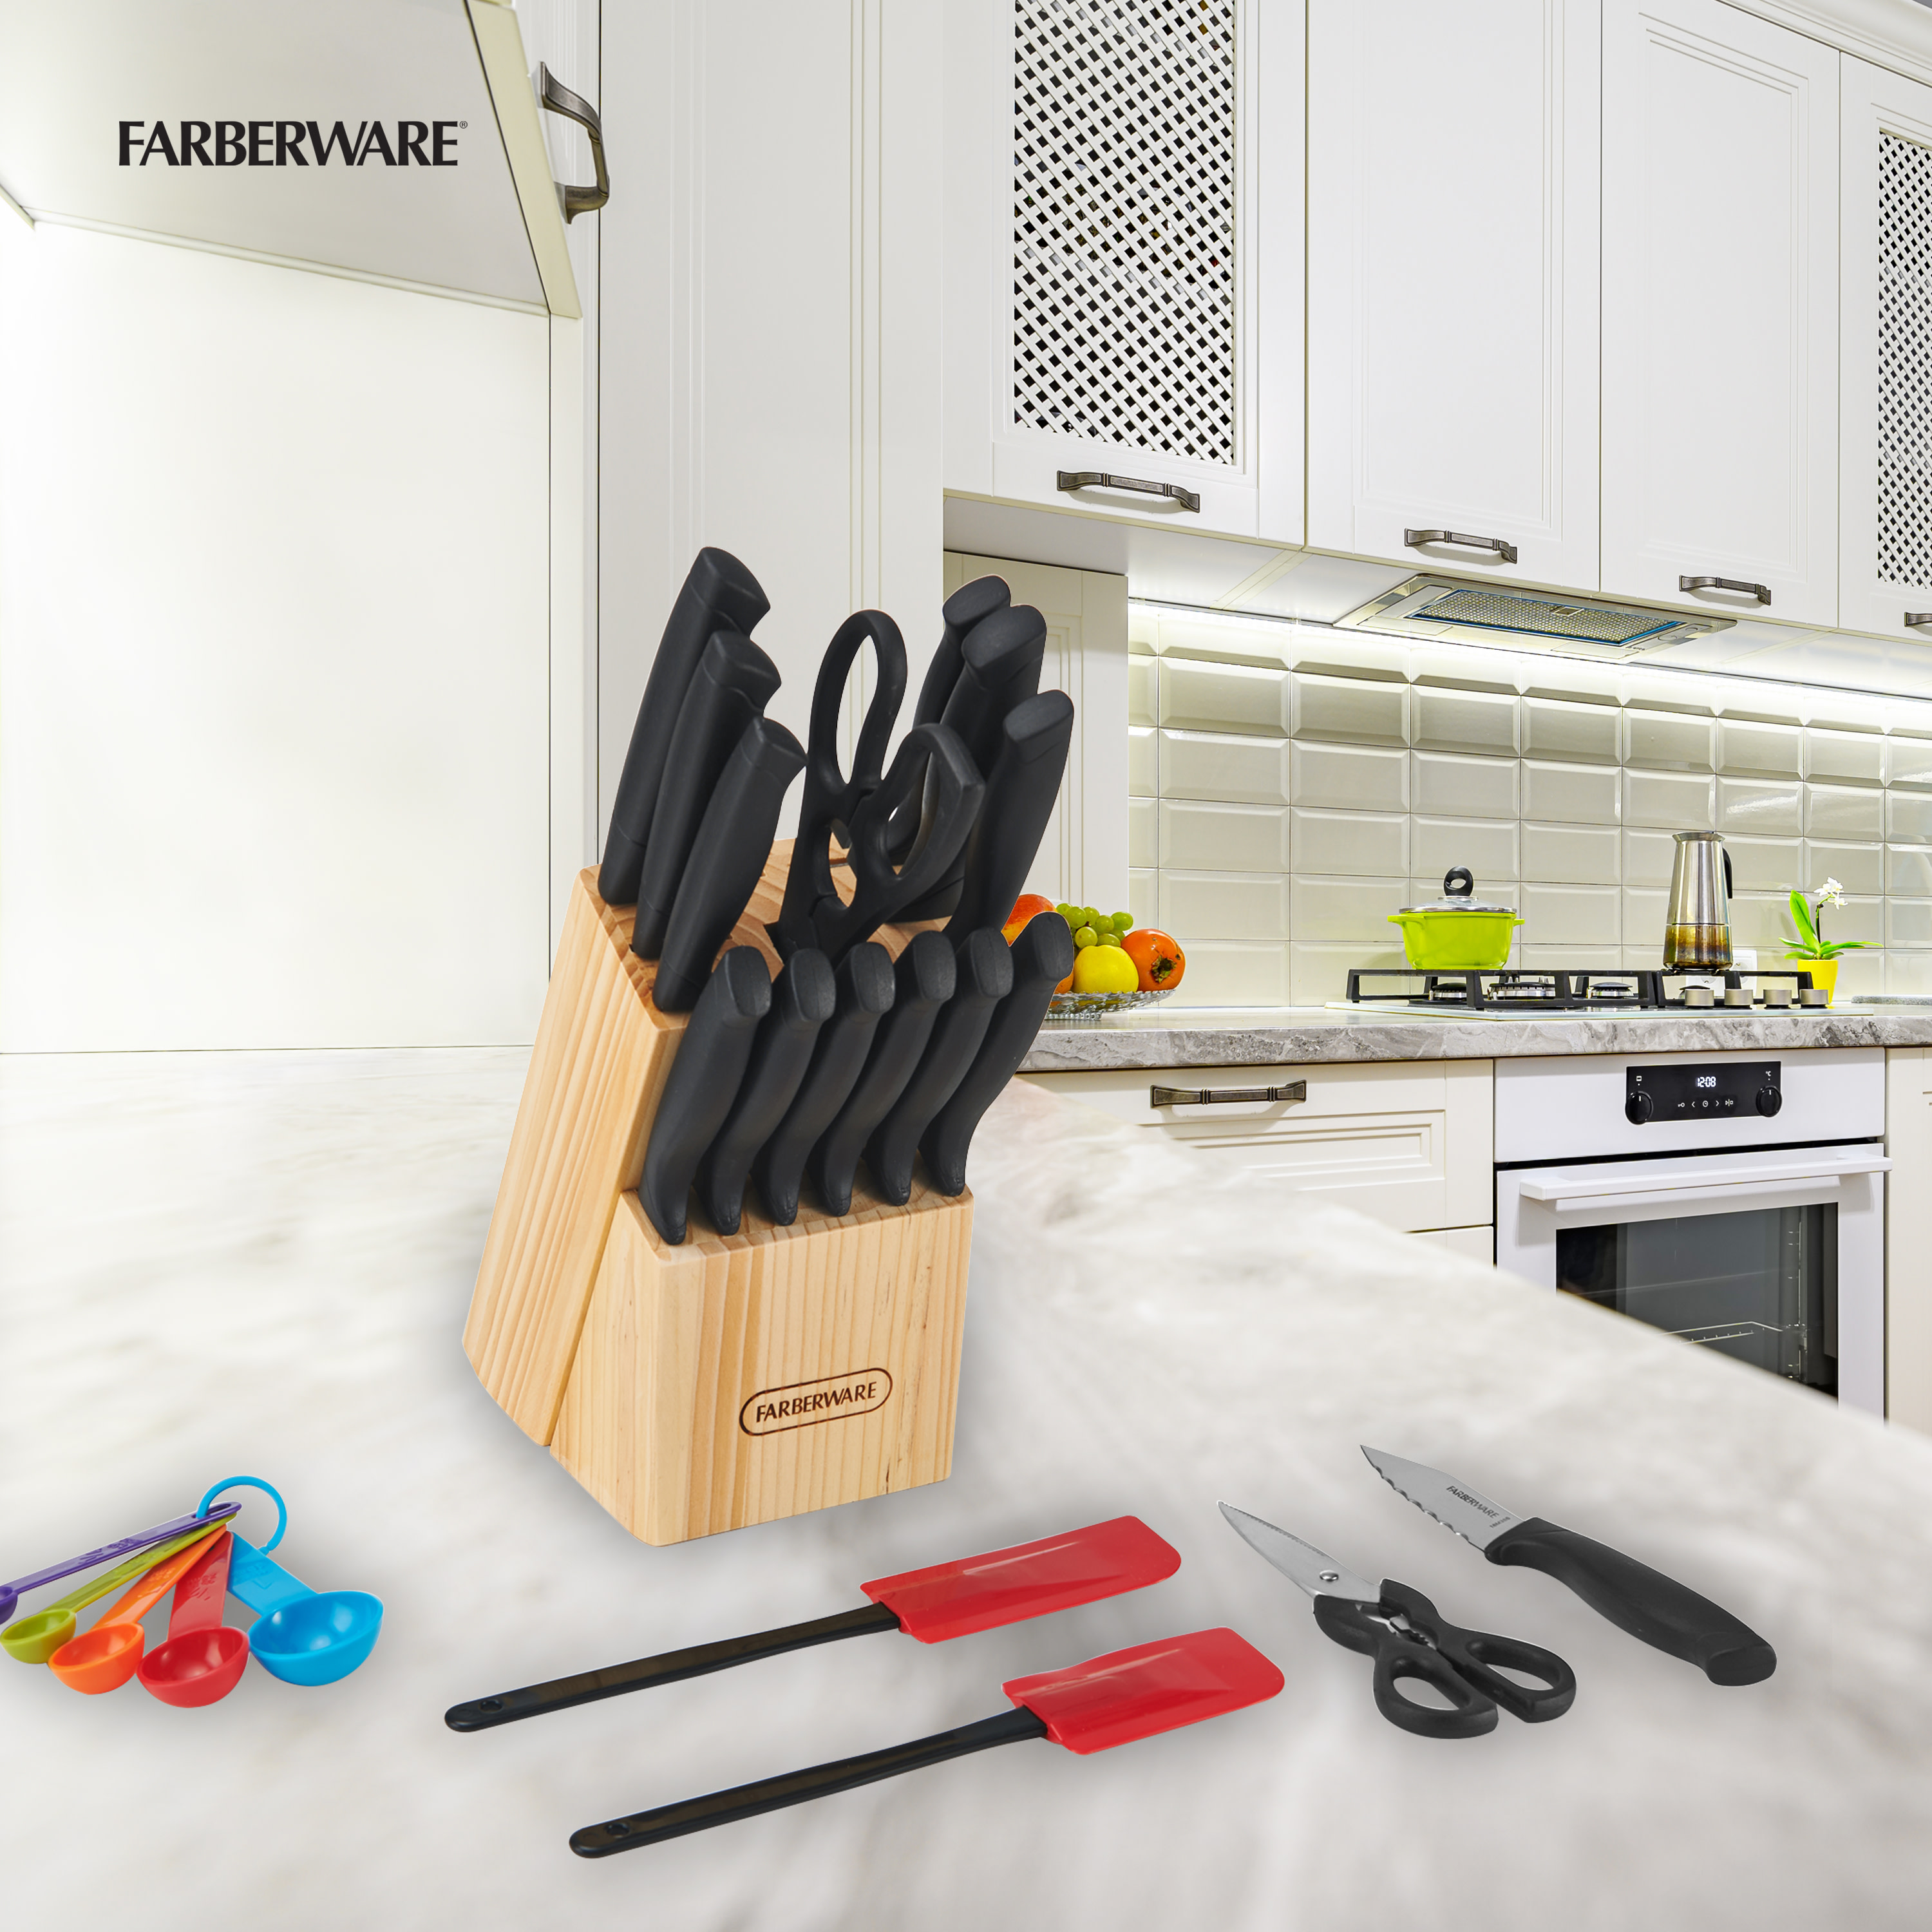 Farberware Classic 23 Piece Never Needs Sharpening Dishwasher Safe Stainless Steel Cutlery and Utensil Set in Black - image 4 of 23